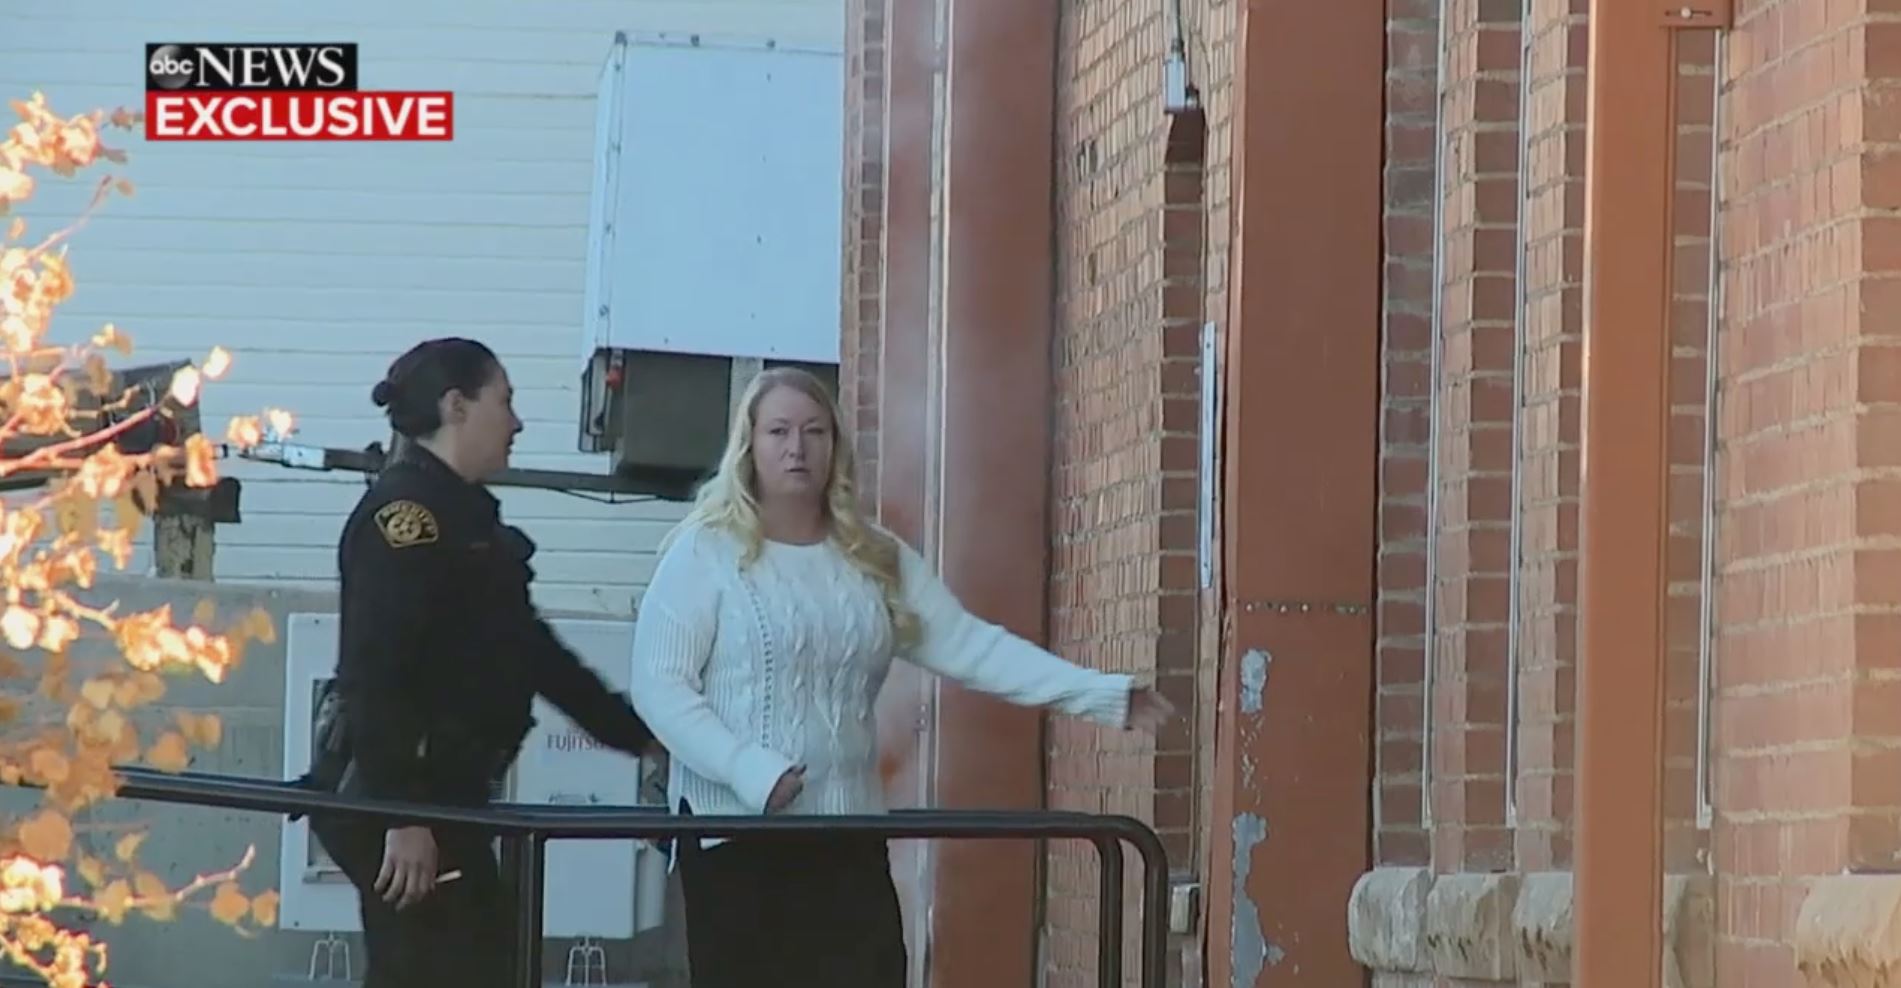 PHOTO: In this screen grab from an exclusive ABC News video, Krystal Lee arrives at the courthouse in Cripple Creek, CO.